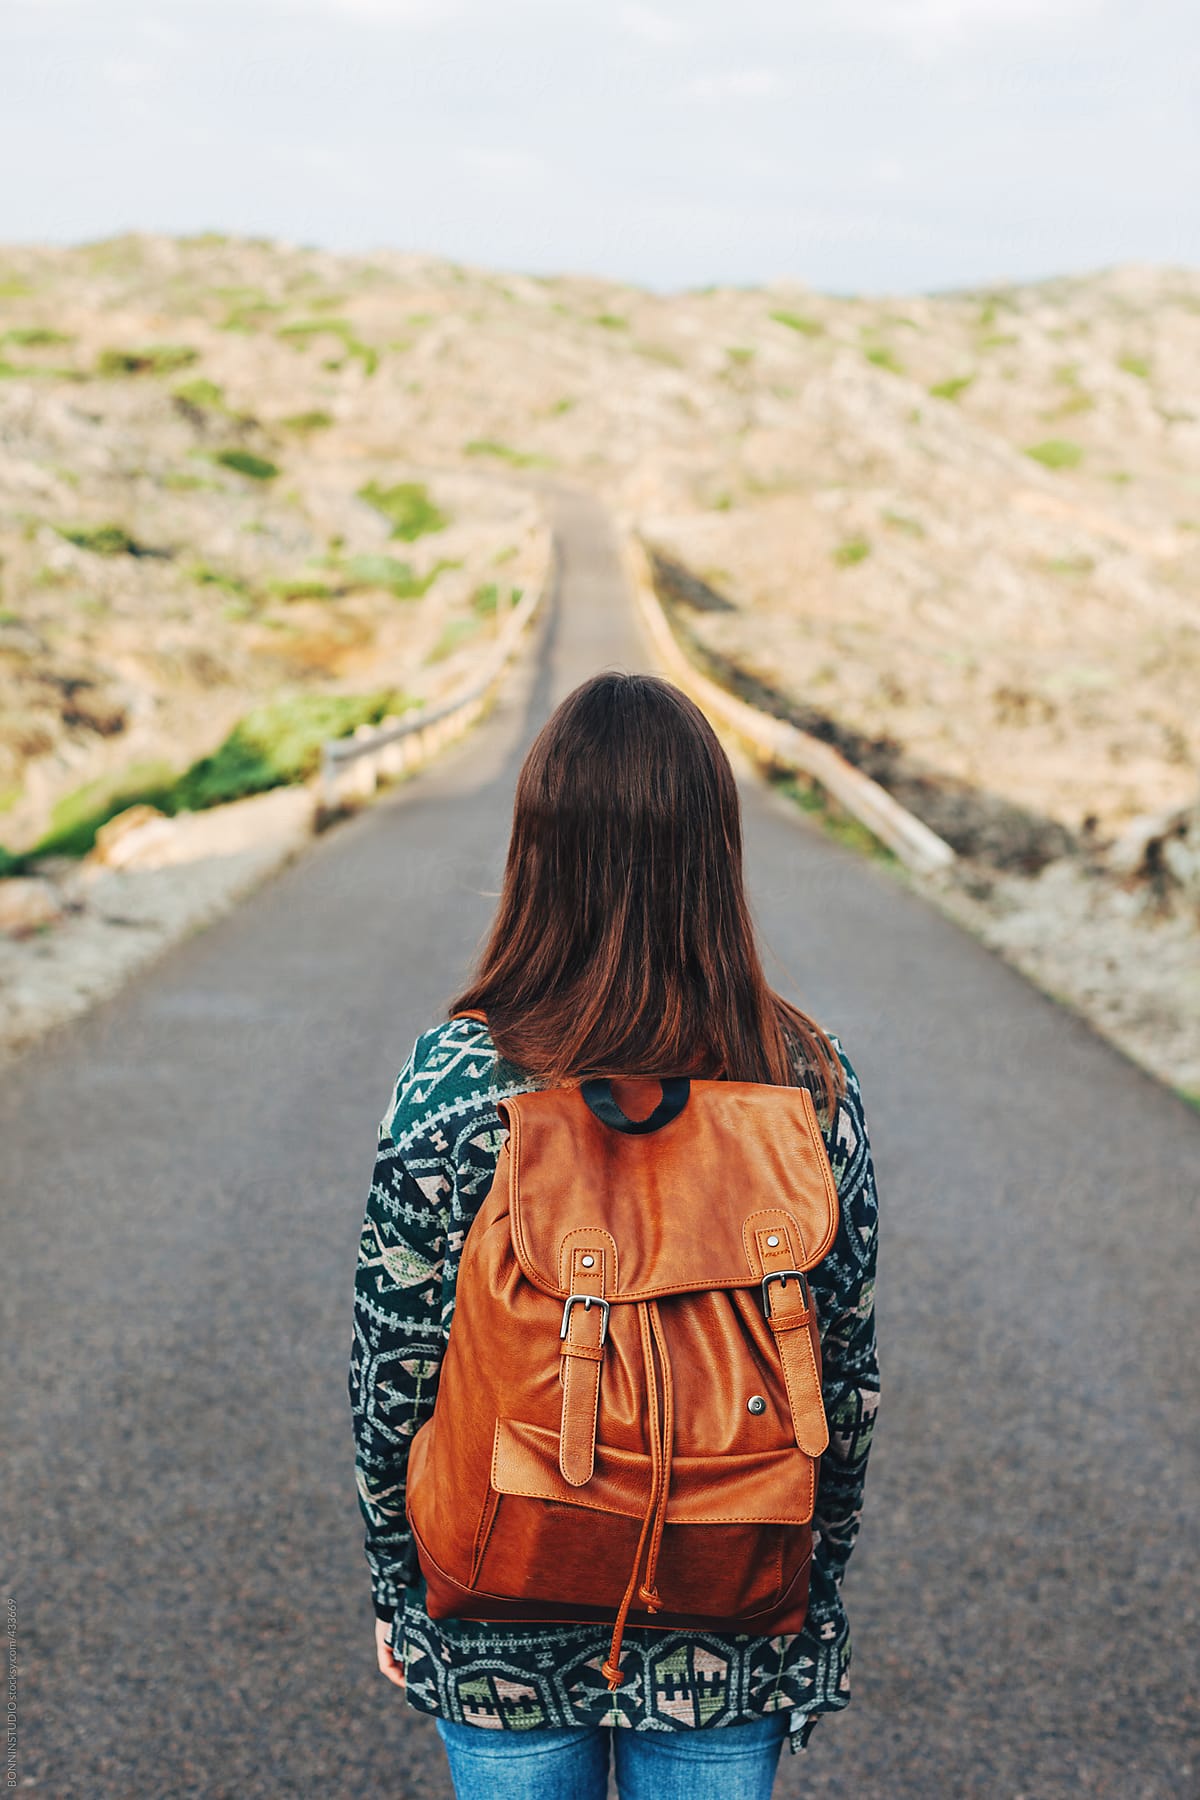 Back view of young woman with leather backpack in the middle of the road.